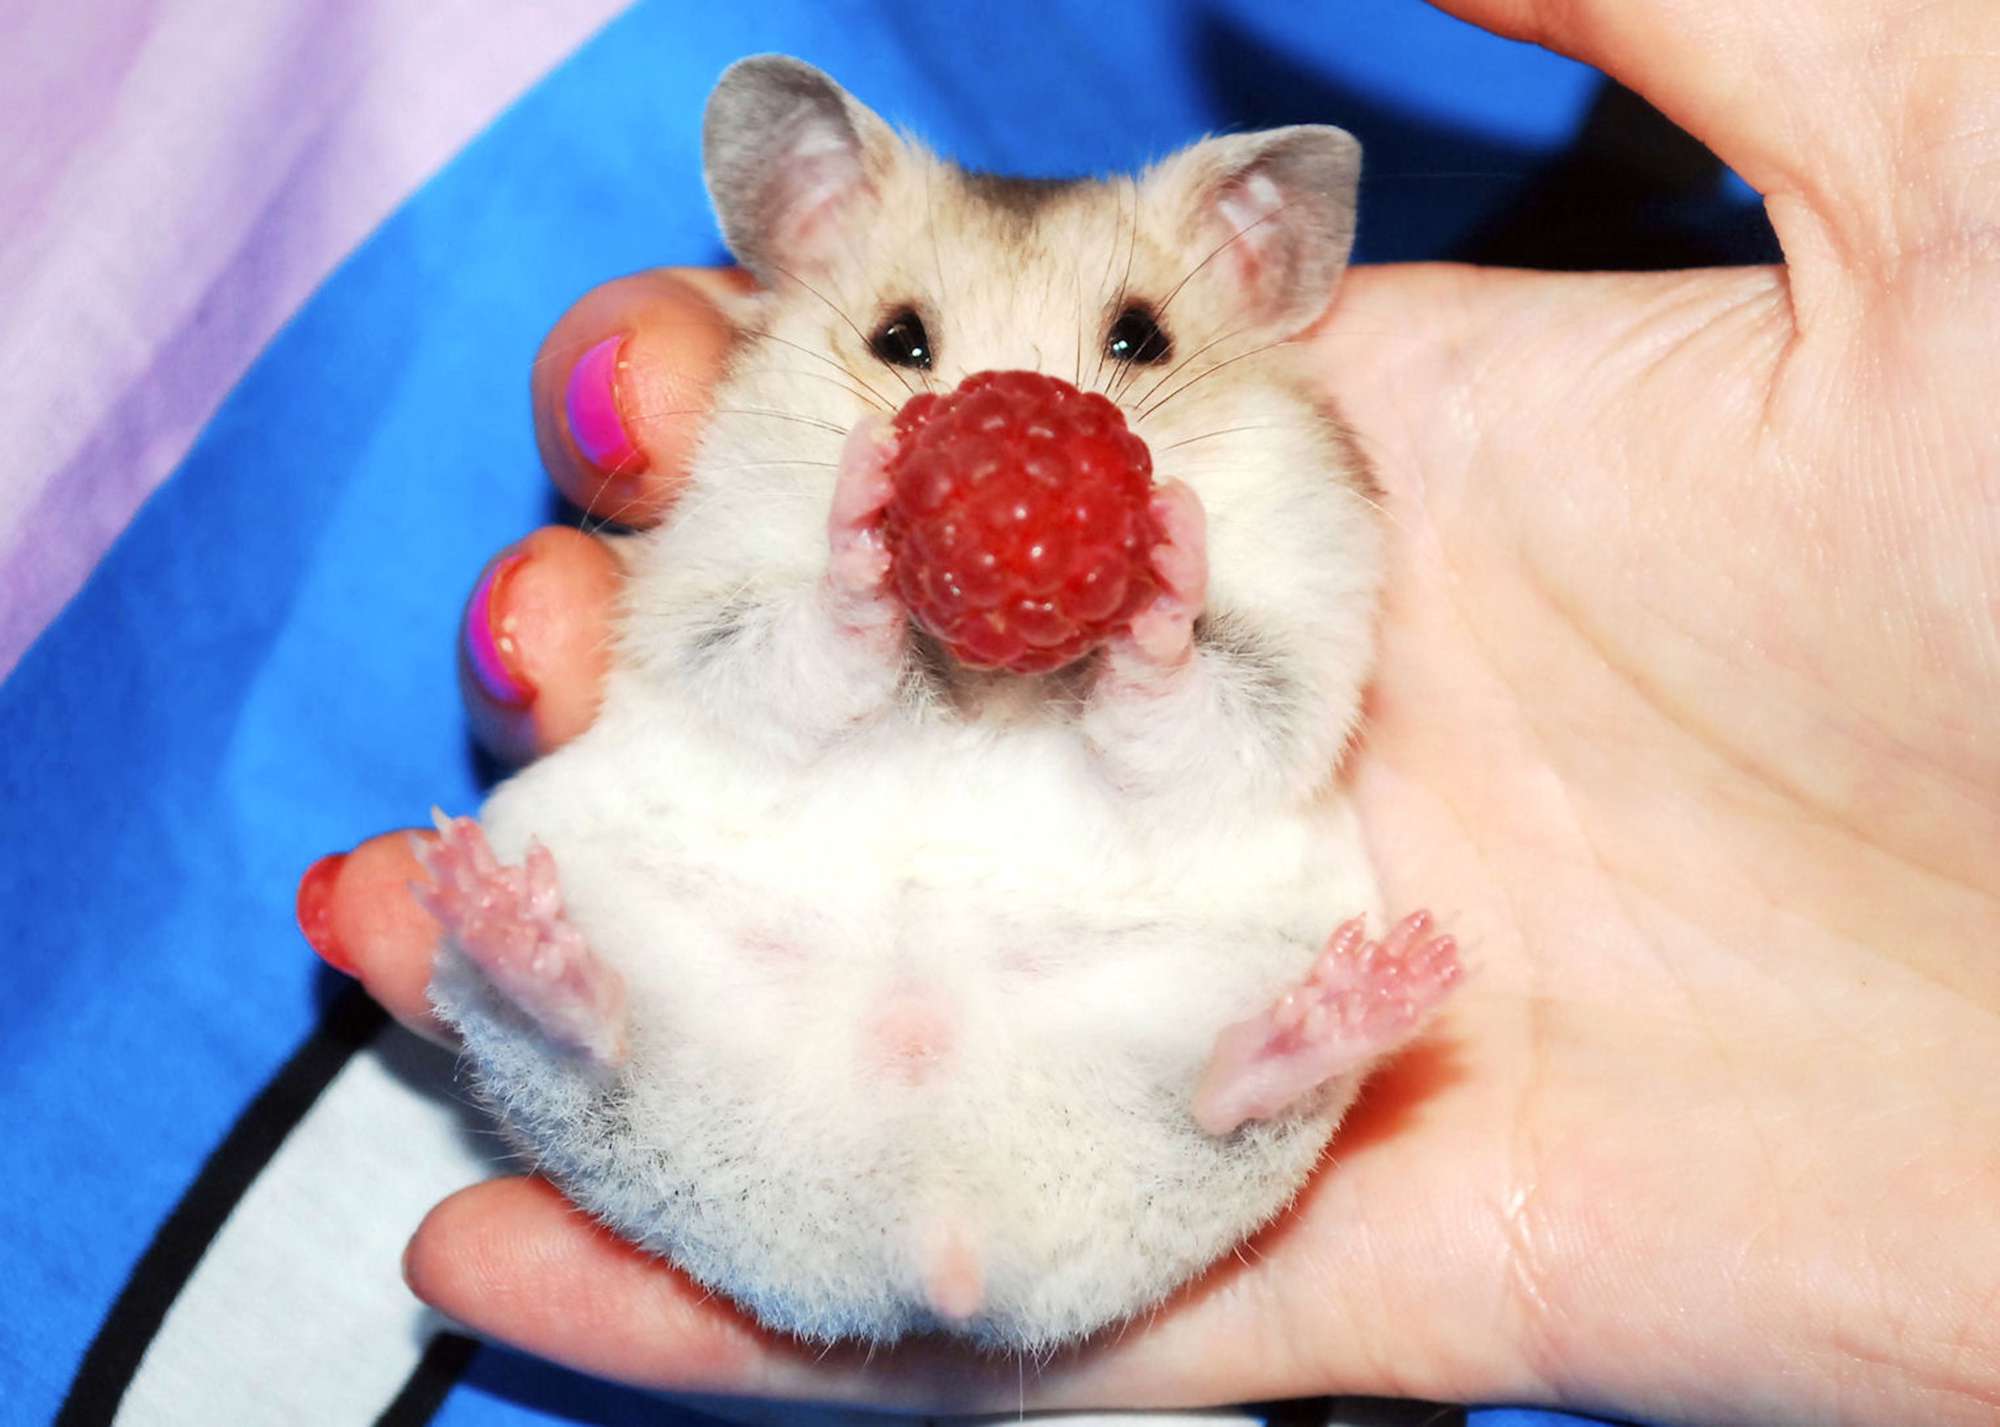 Female Syrian hamster with raspberry in hand